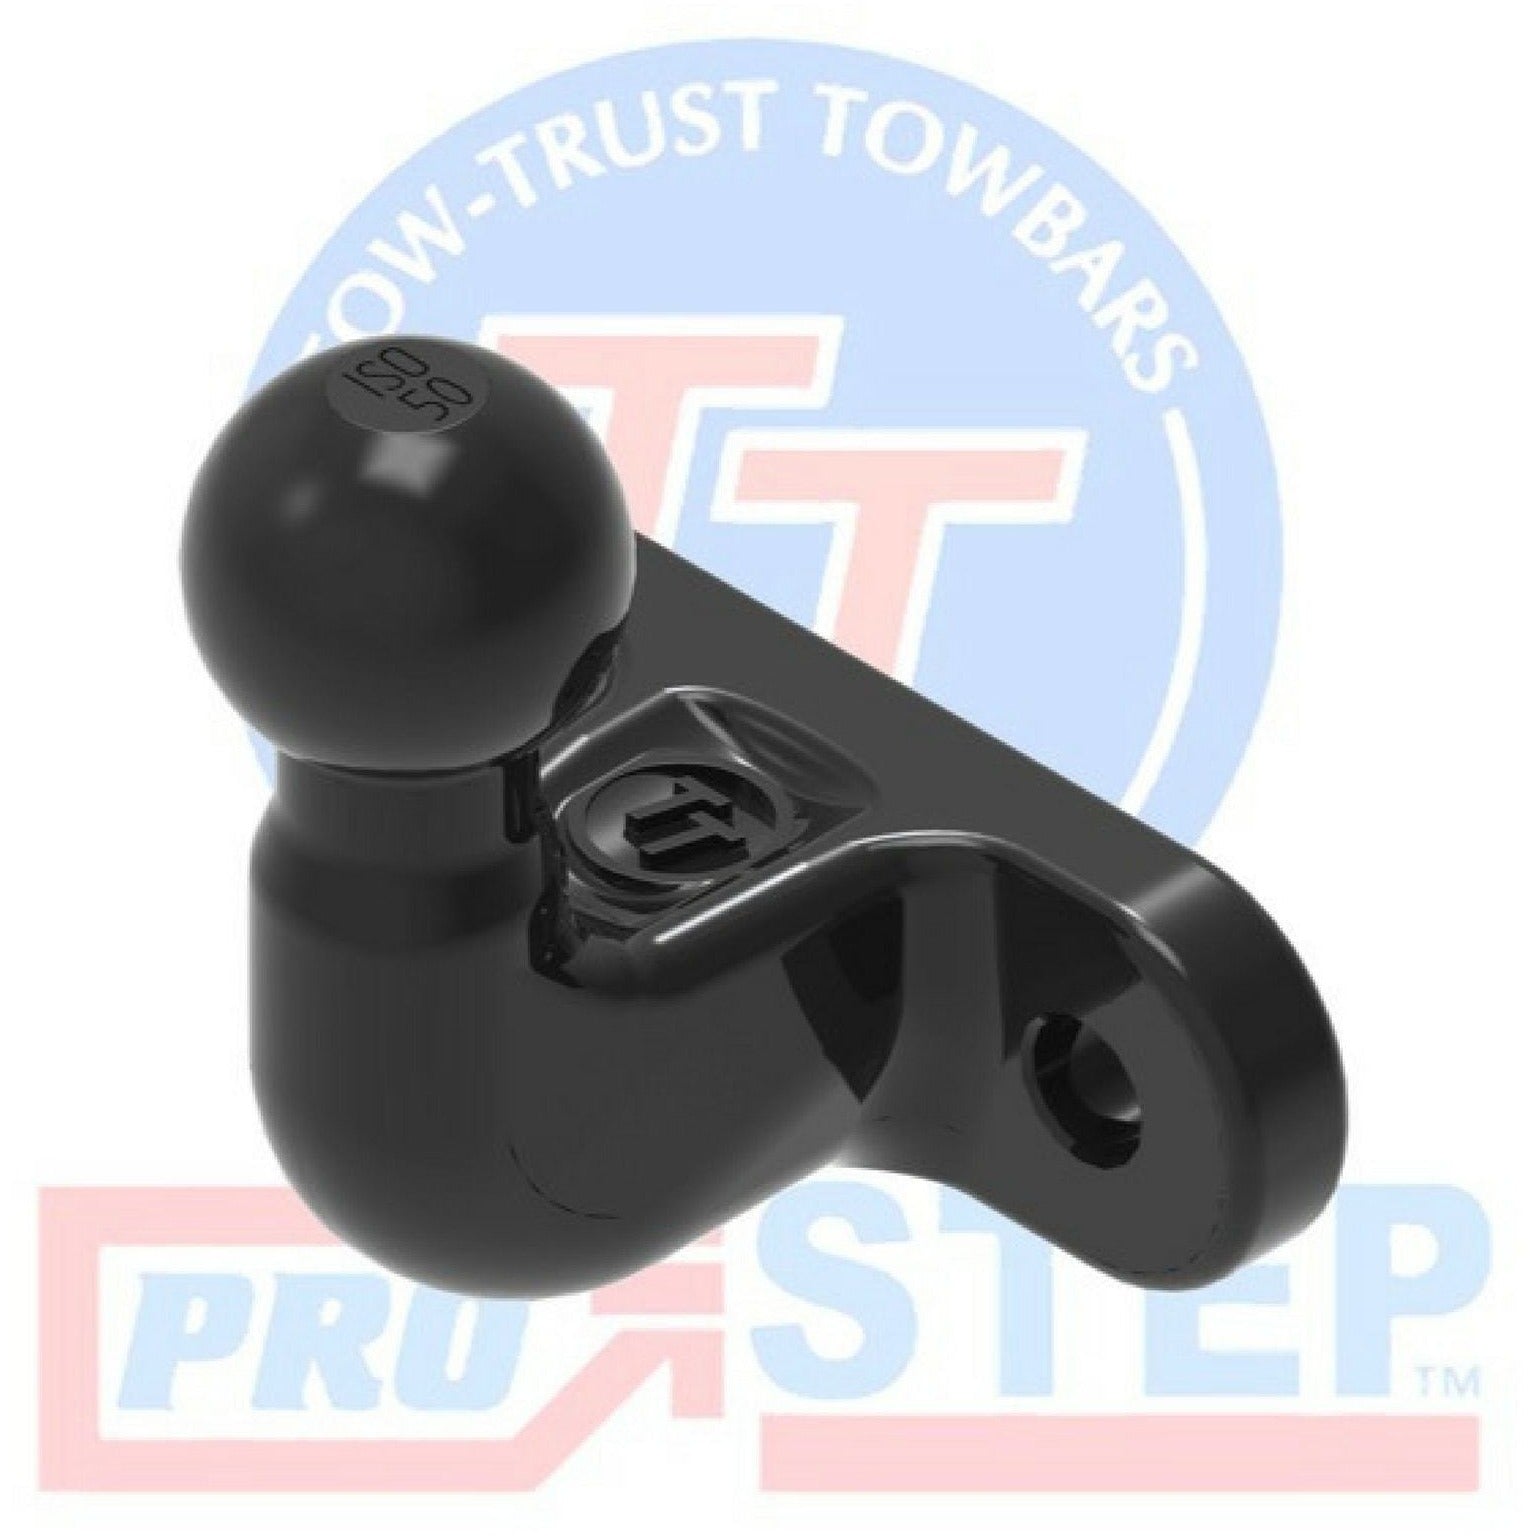 Tow Trust Autotrail Towbar (TAUT1) - Quality Caravan Awnings